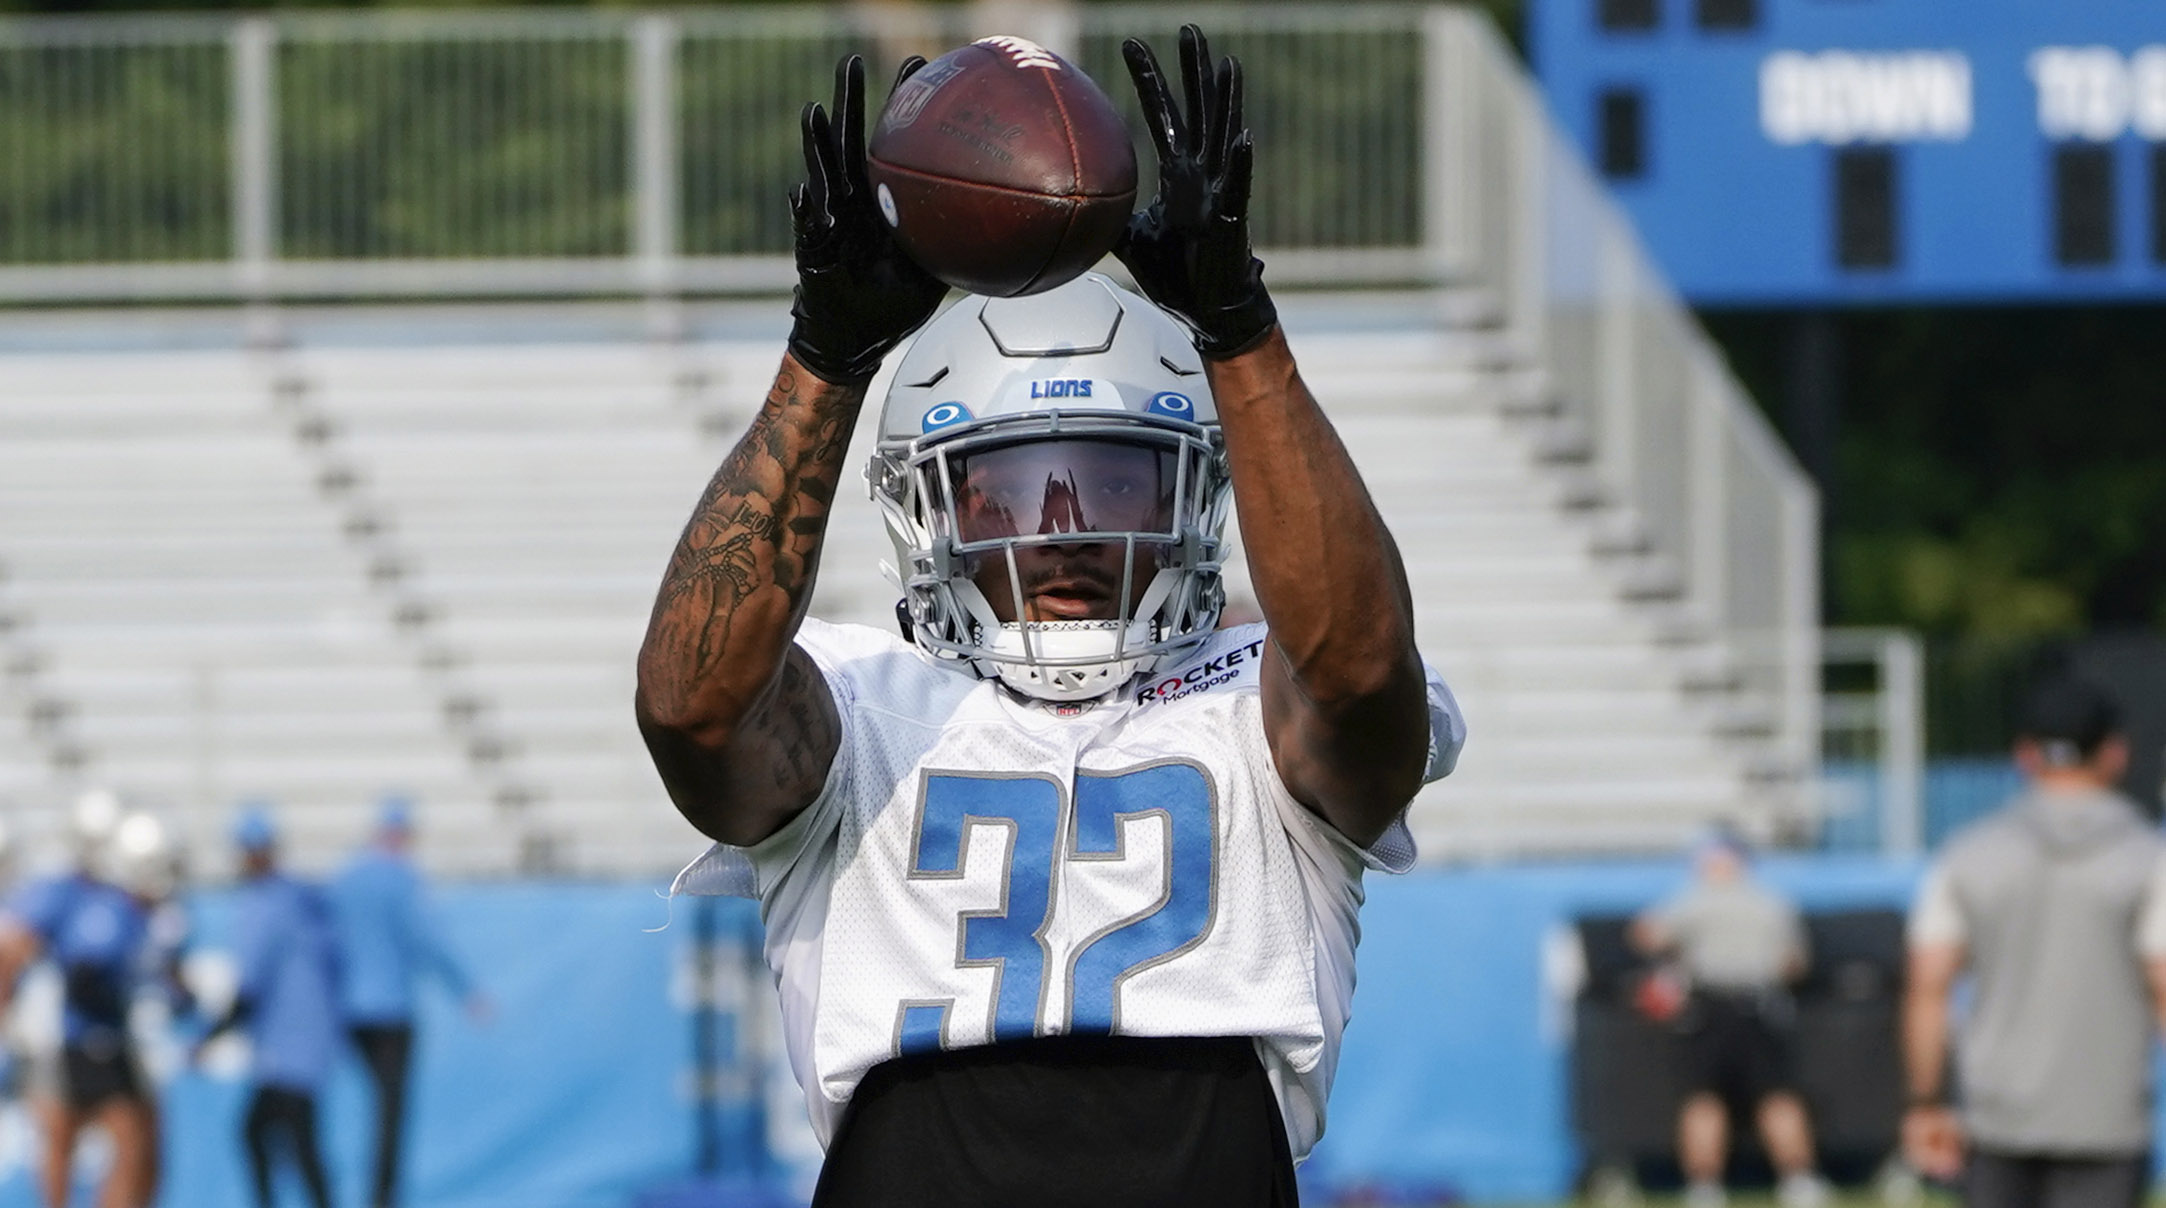 Brian Branch catches a pass during Lions training camp.